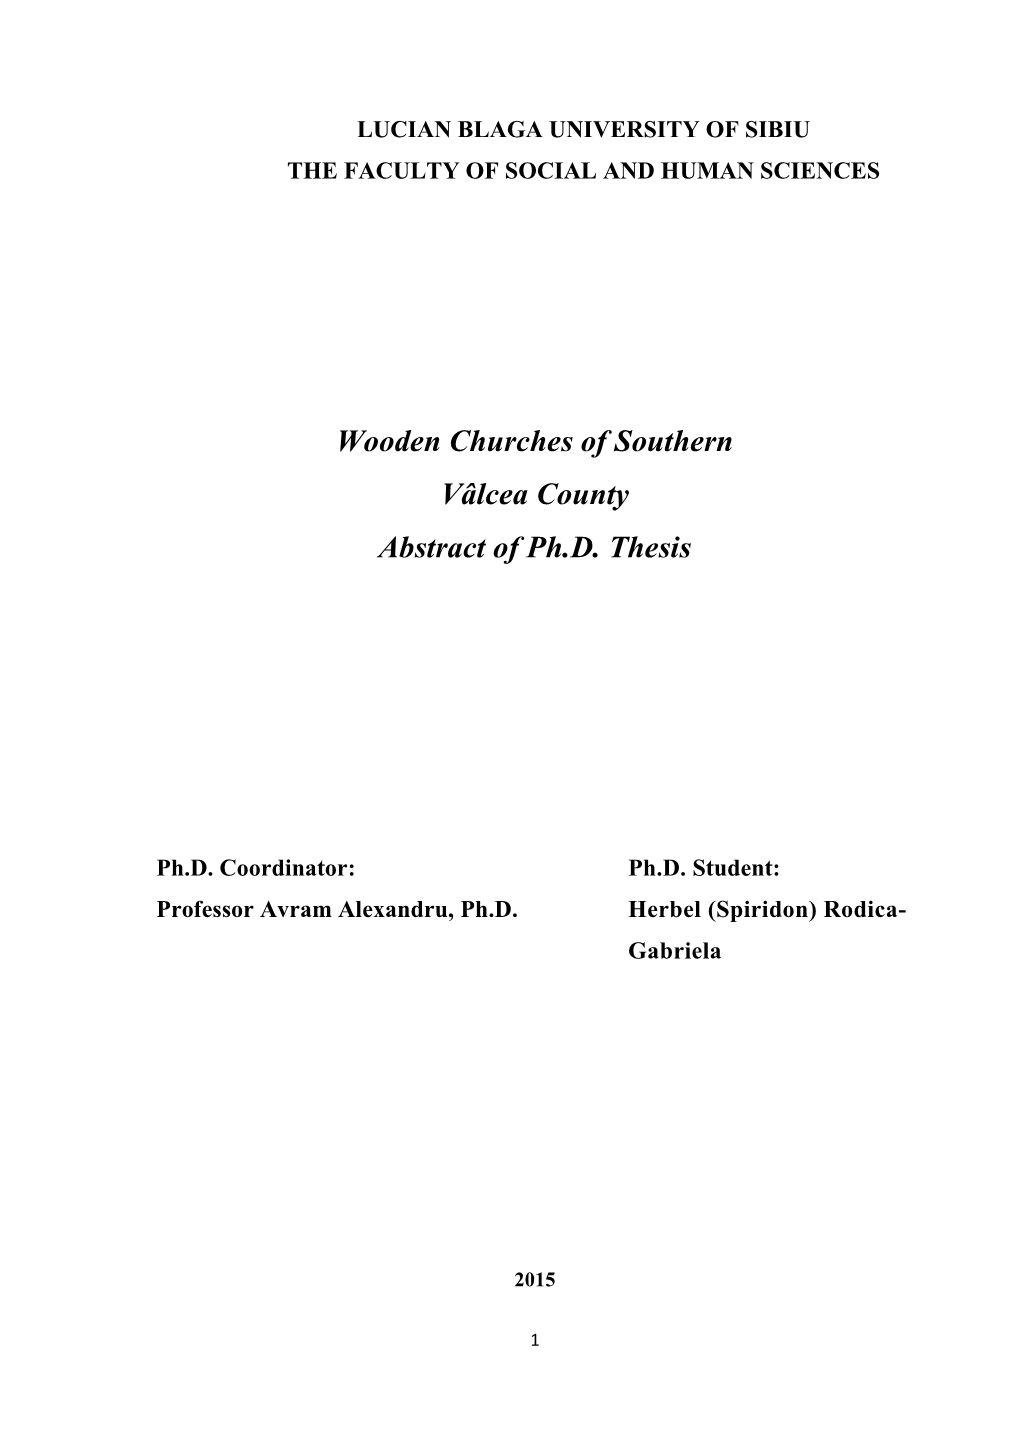 Wooden Churches of Southern Vâlcea County Abstract of Ph.D. Thesis